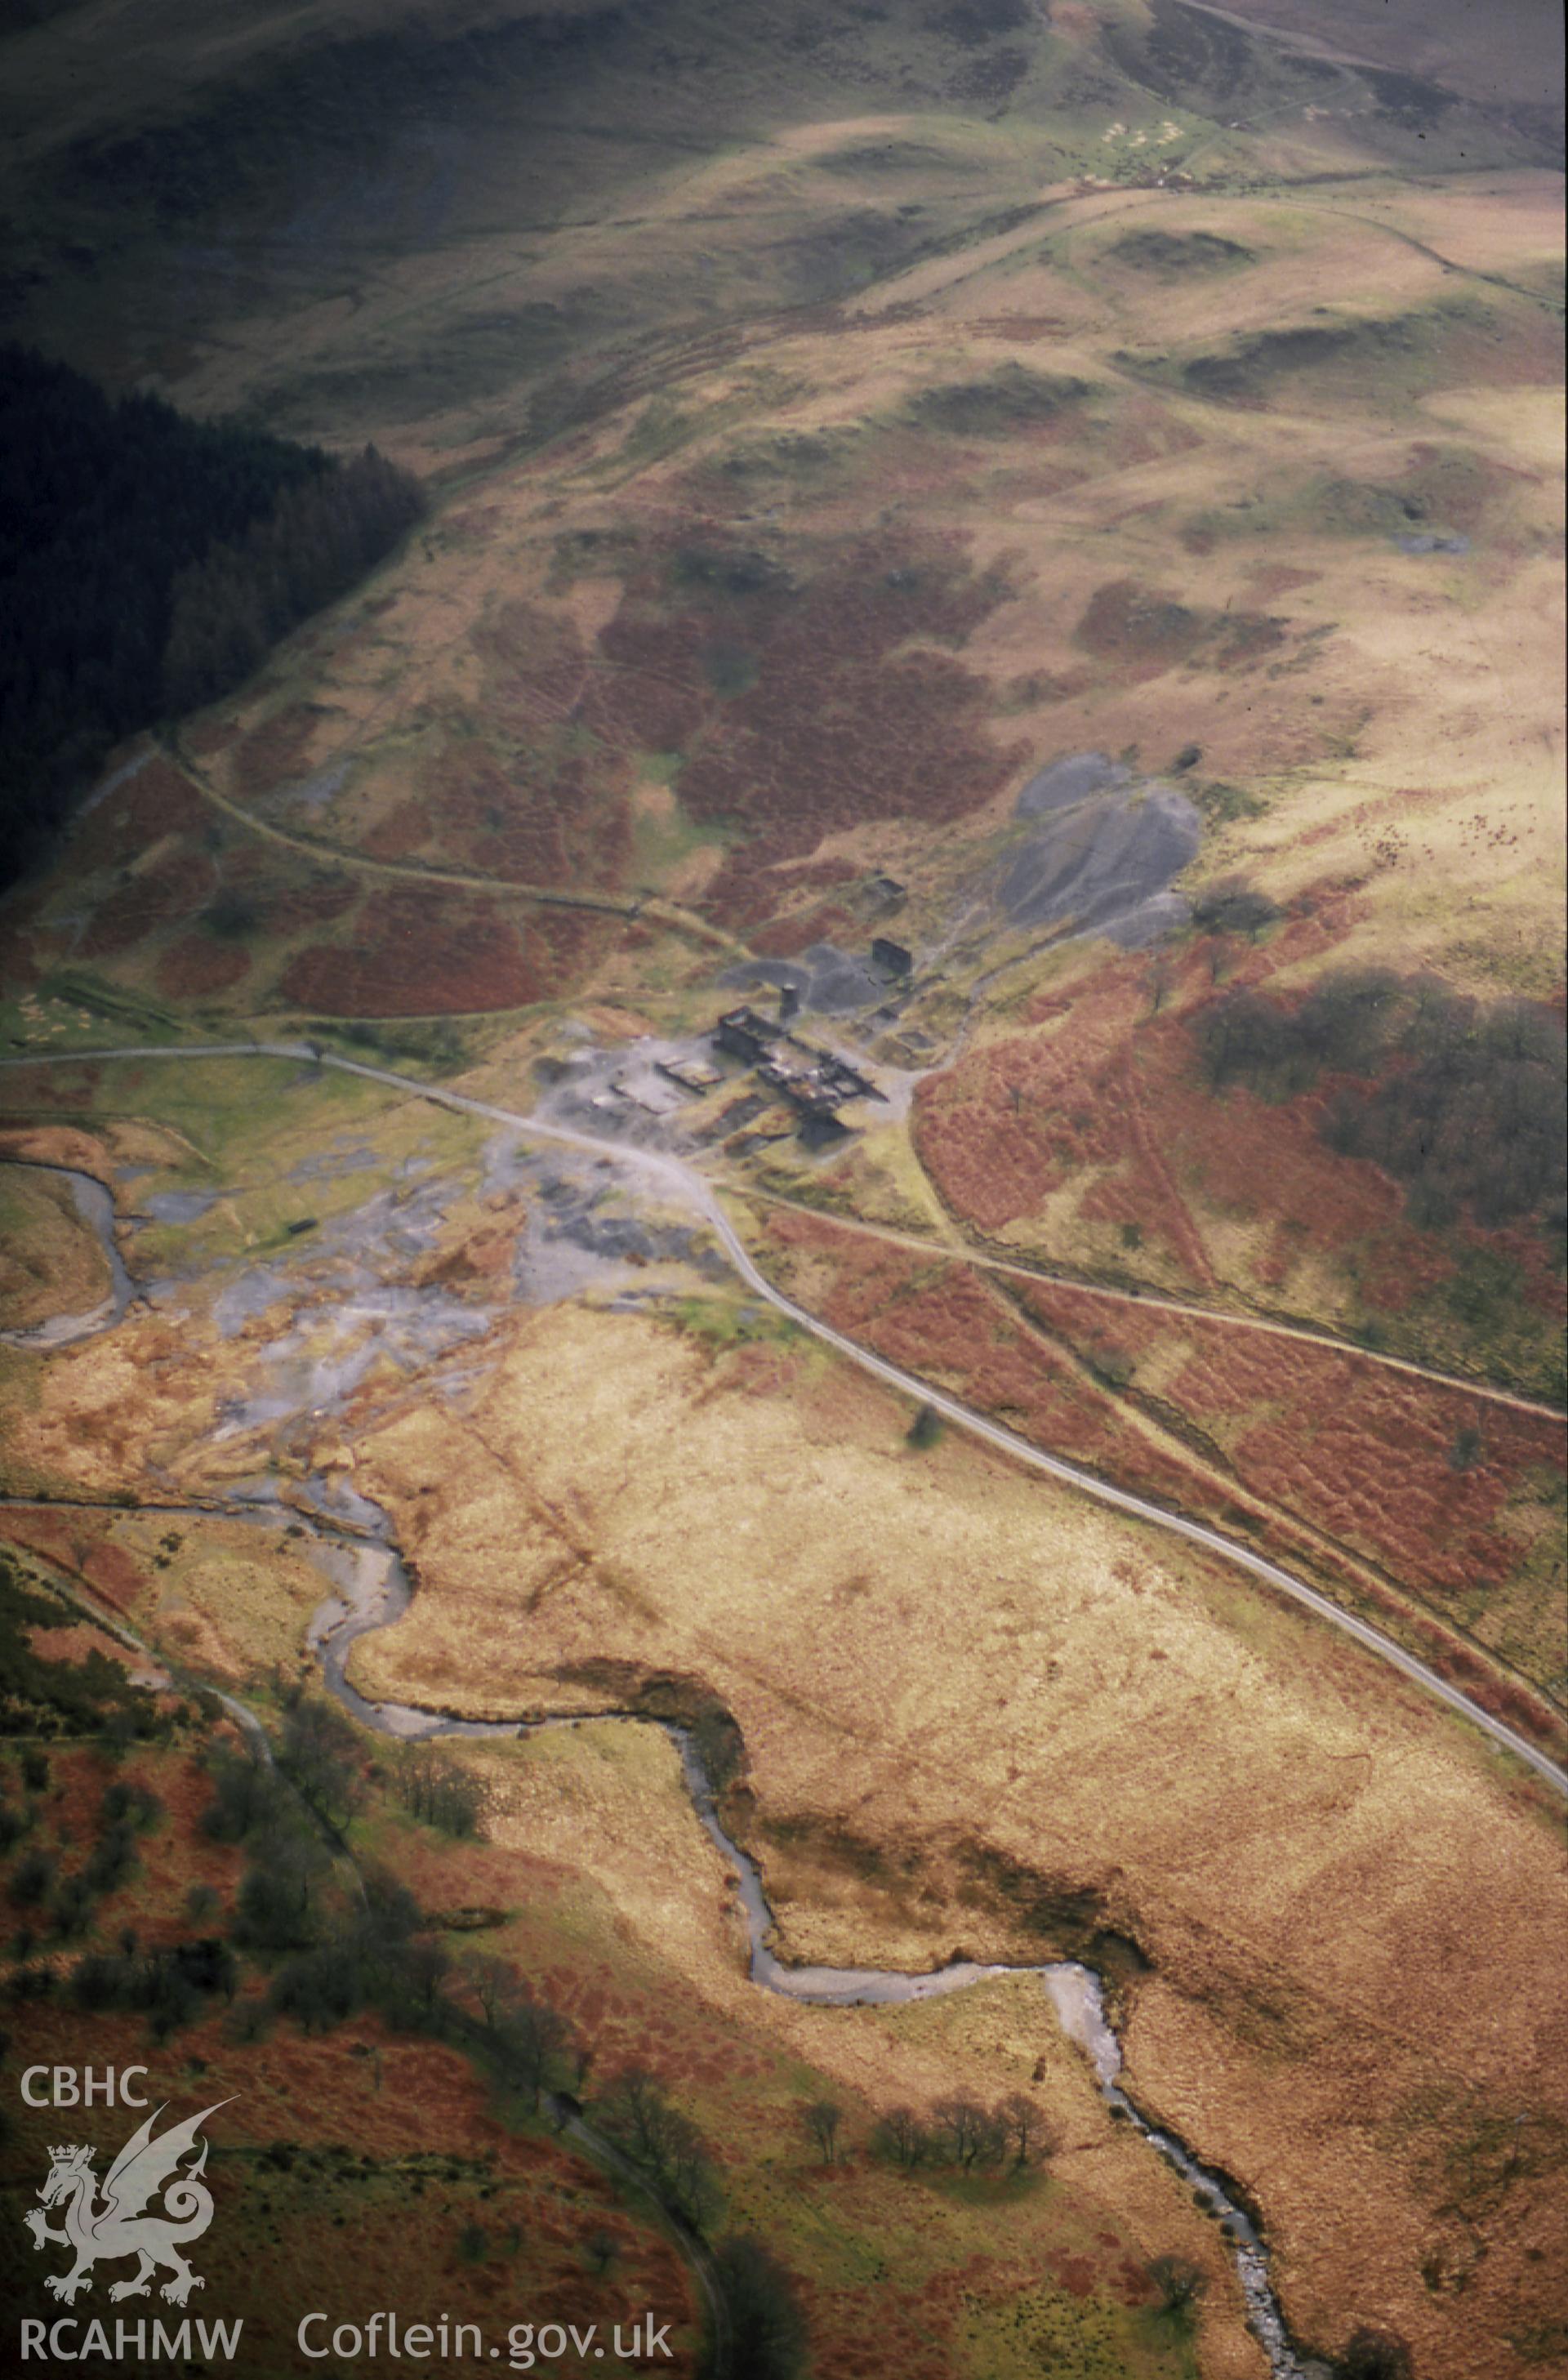 RCAHMW colour slide oblique aerial photograph of Bwlchglas Mine, Ceulanamaesmawr, taken on 19/03/1999 by Toby Driver